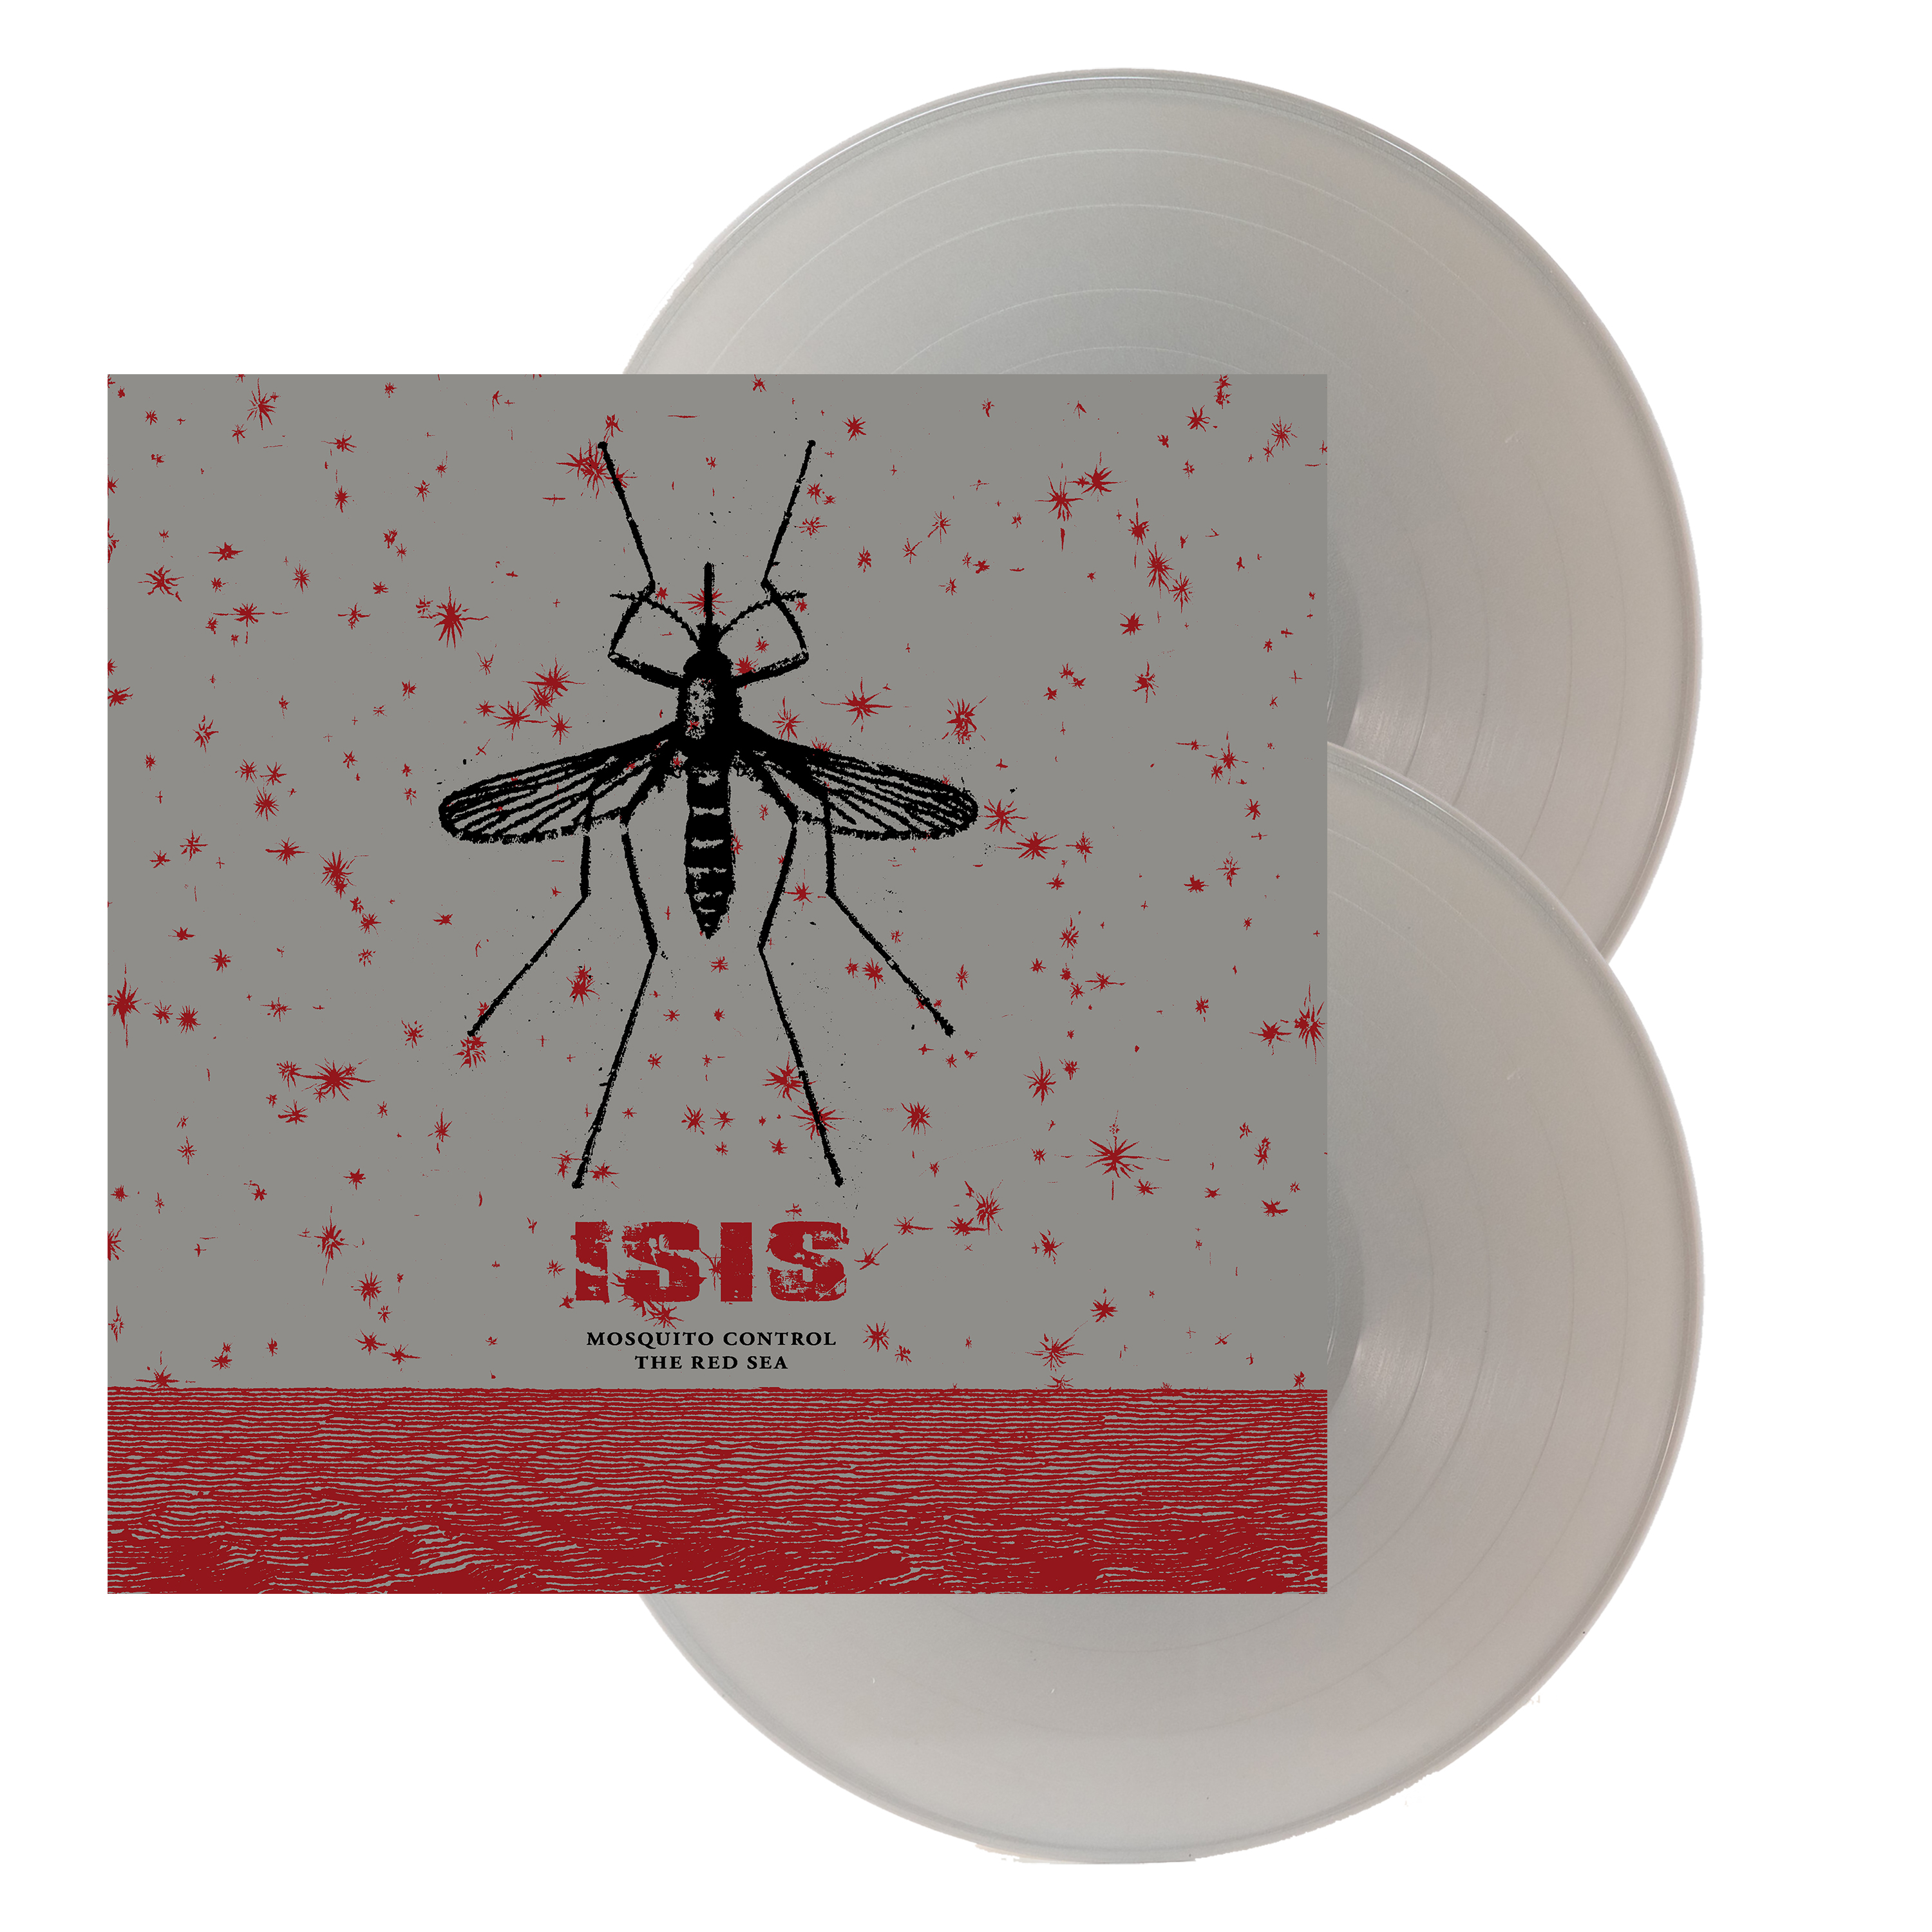 Isis - Mosquito Control / The Red Sea [Indie-Exclusive Silver Vinyl]